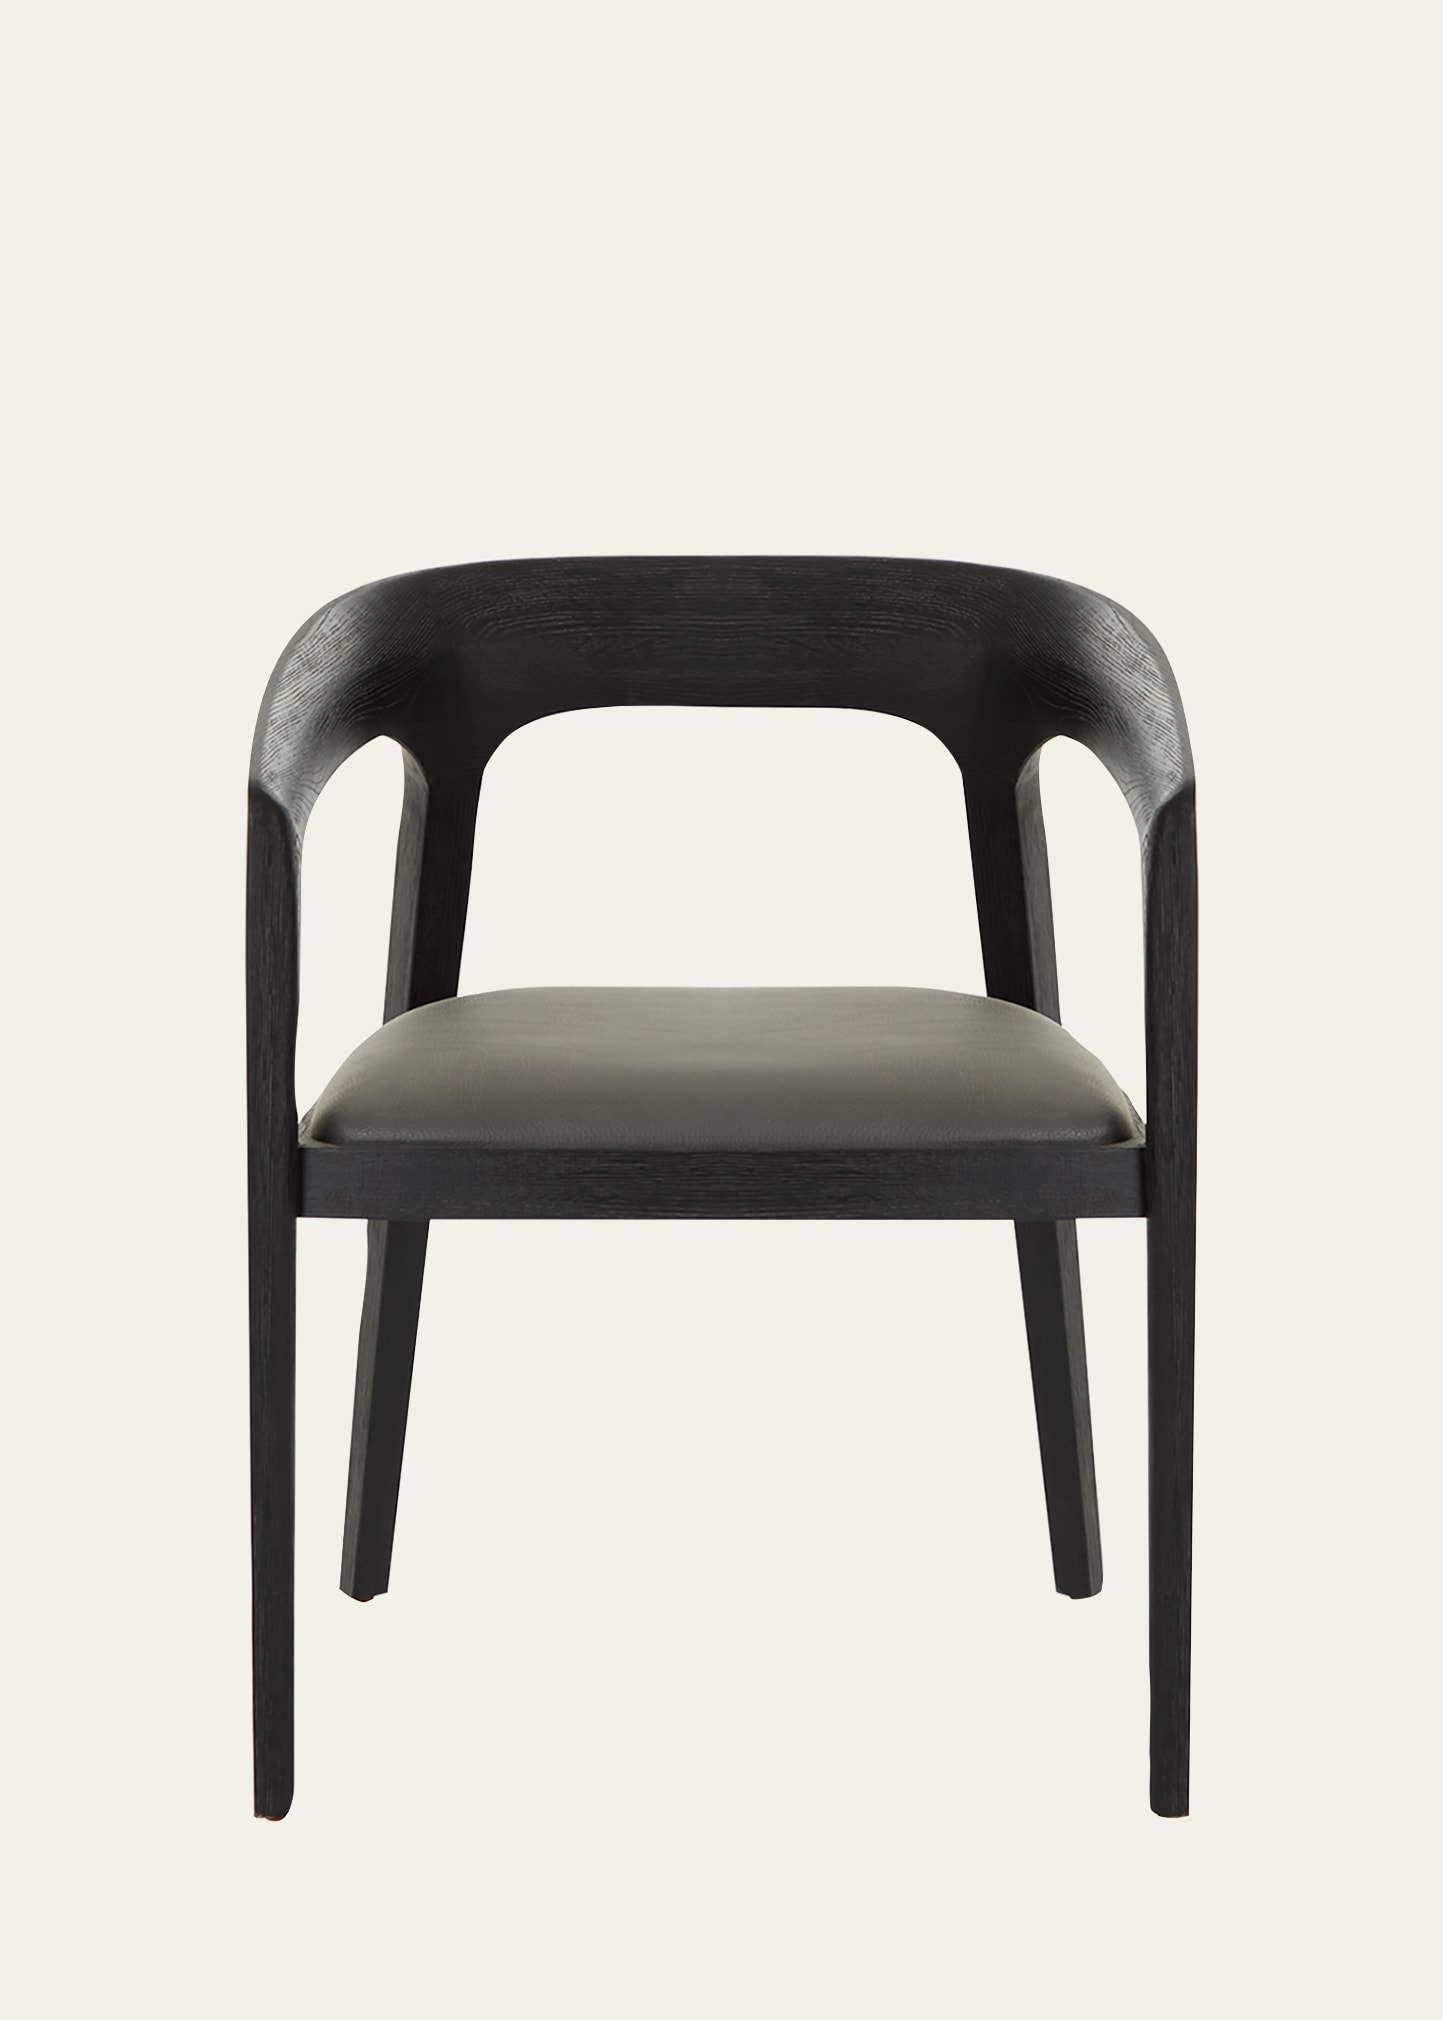 Interlude Home Kendra Dining Chair In Black